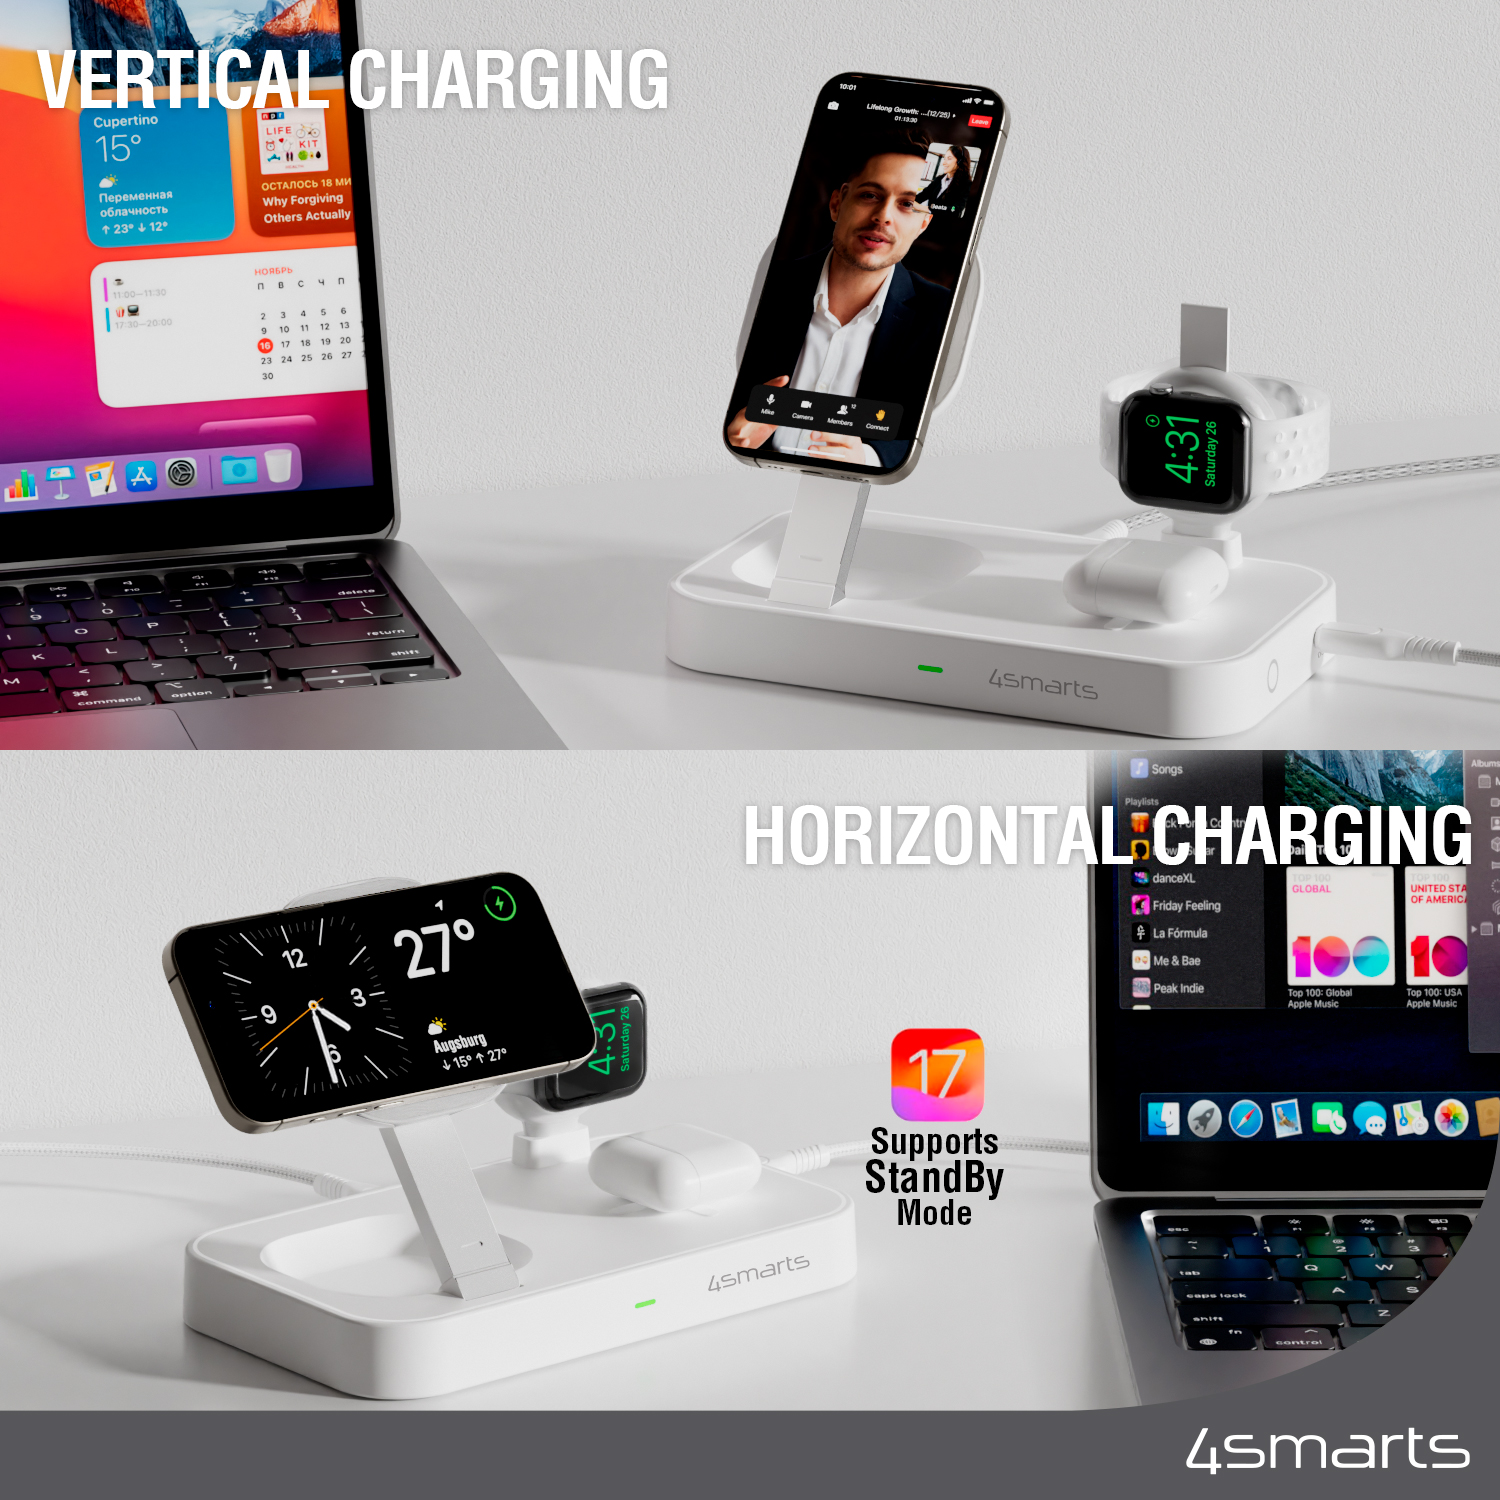 The 4smarts Qi2 Trident Charging Dock supports horizontal and vertical charging of the phone, as well as Apple Stand-By mode.